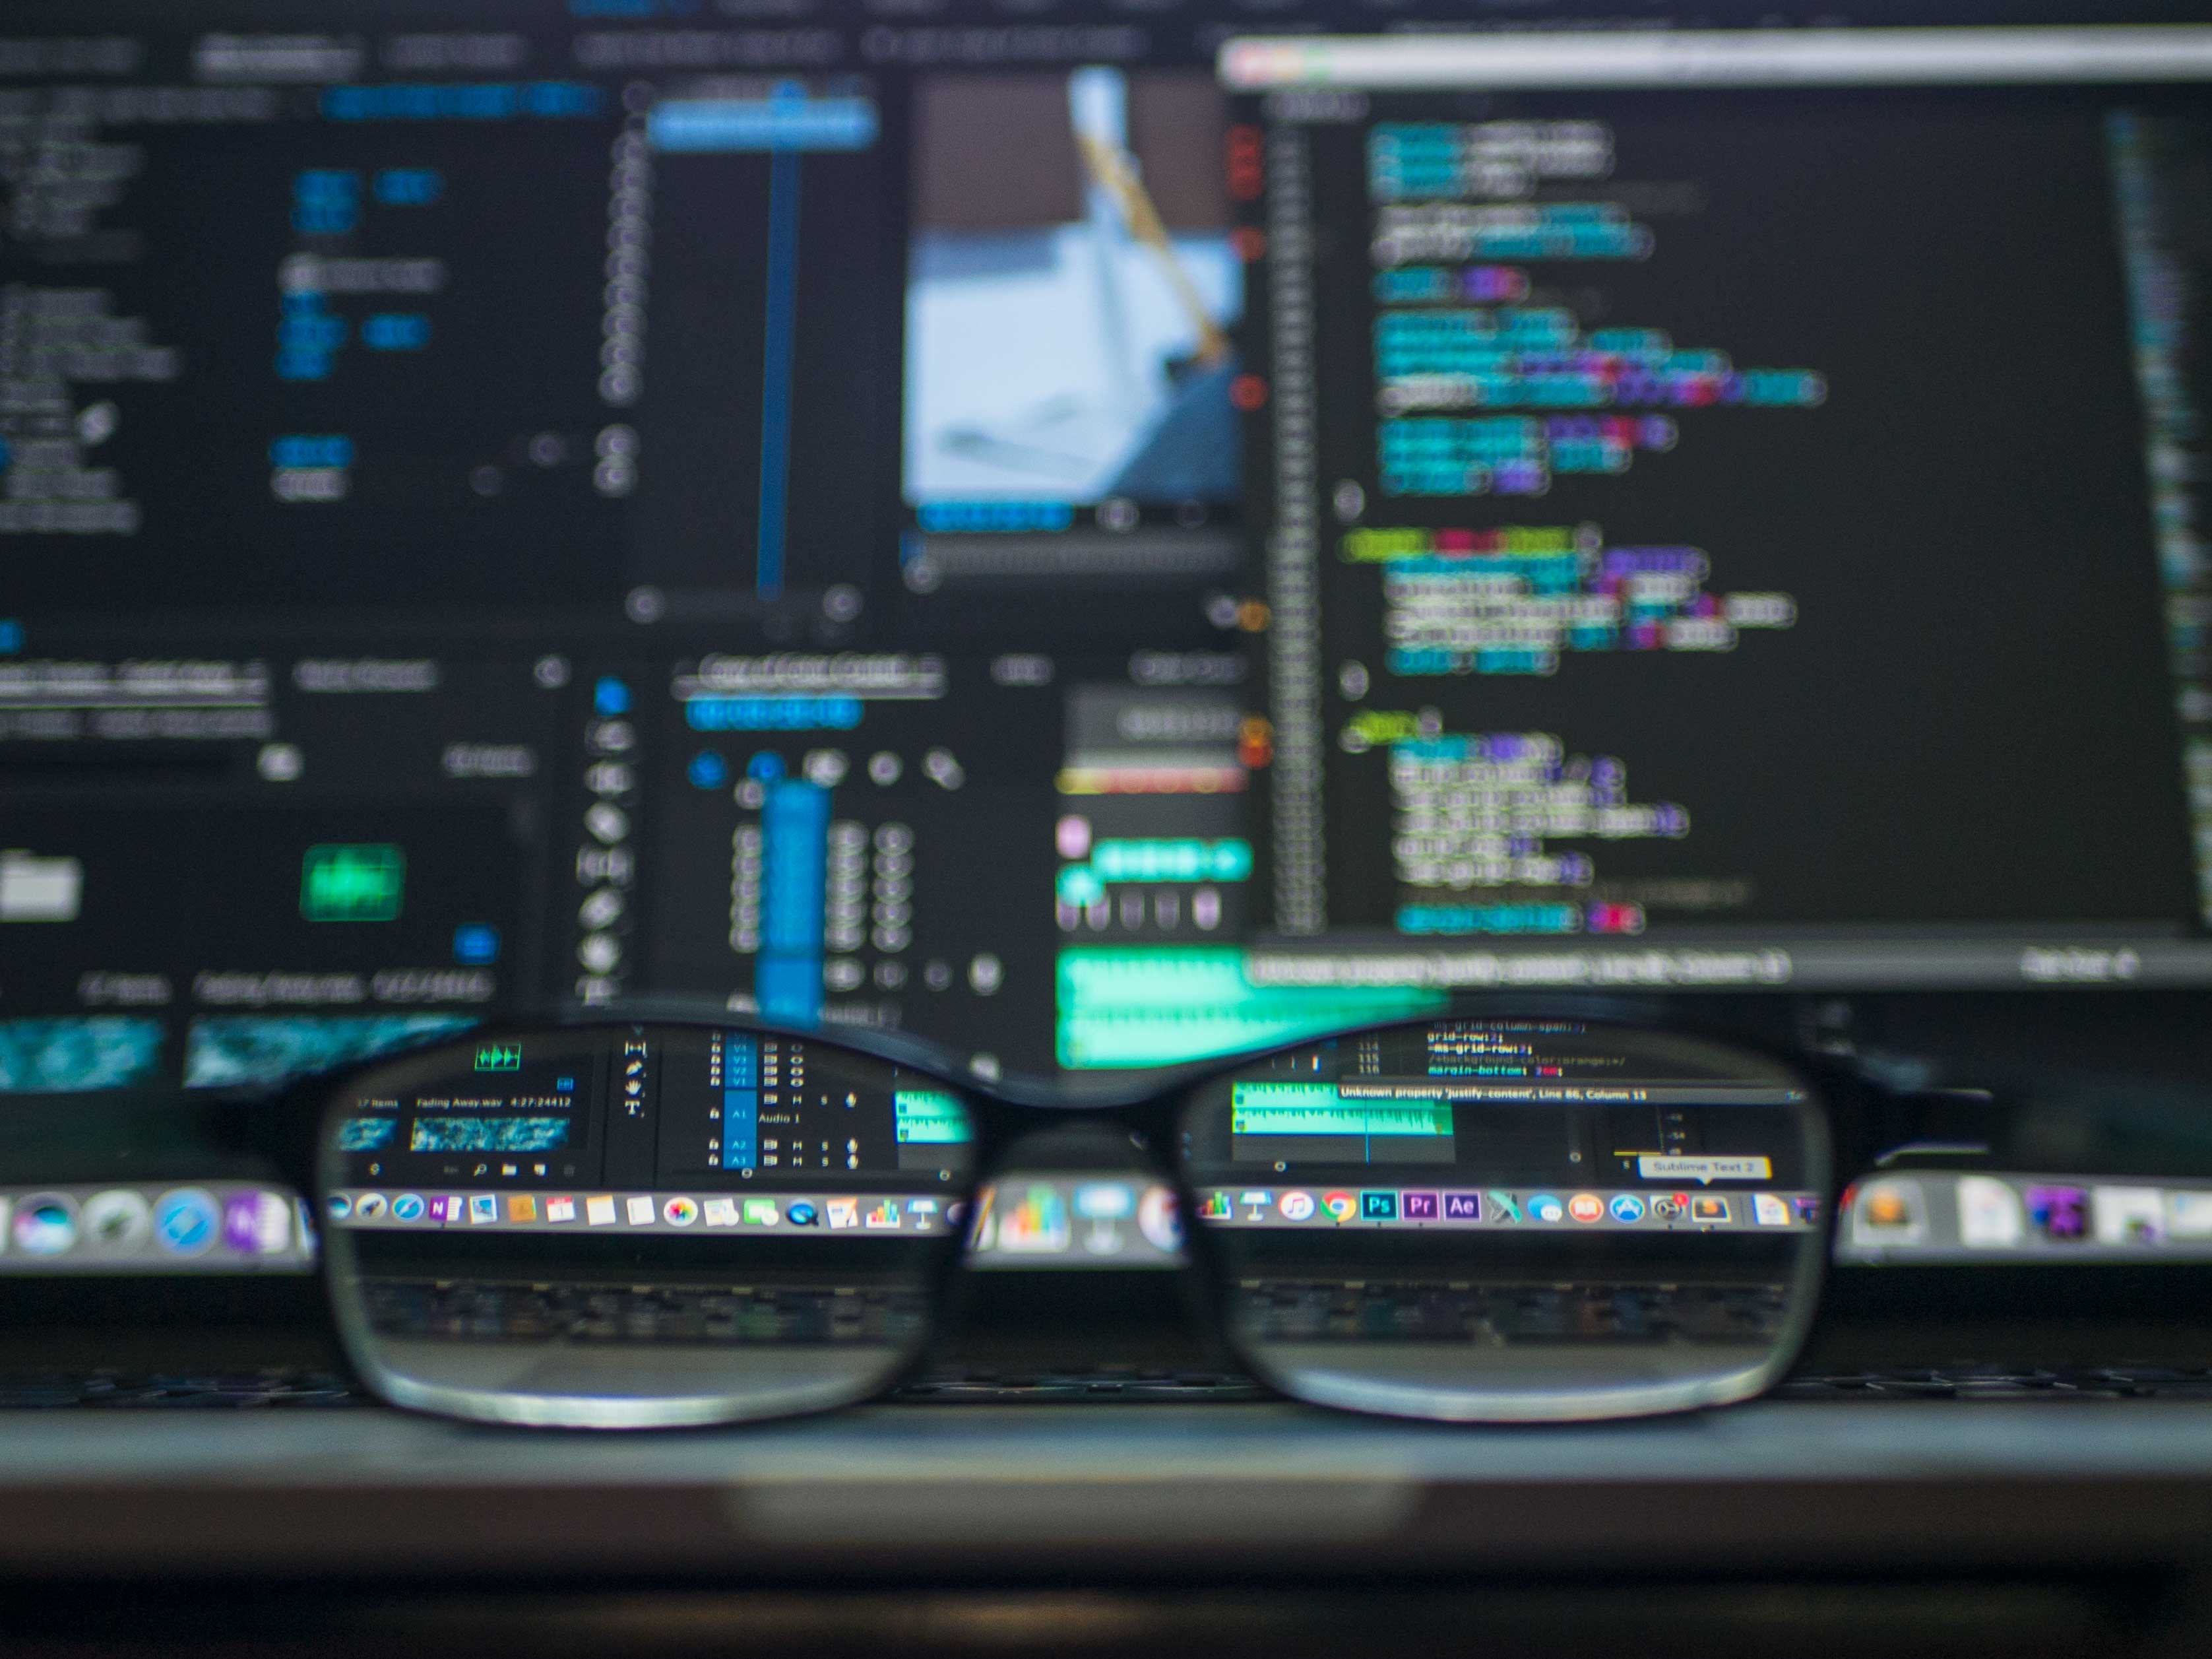 Photograph of eyeglasses focusing on a computer screen displaying software code.